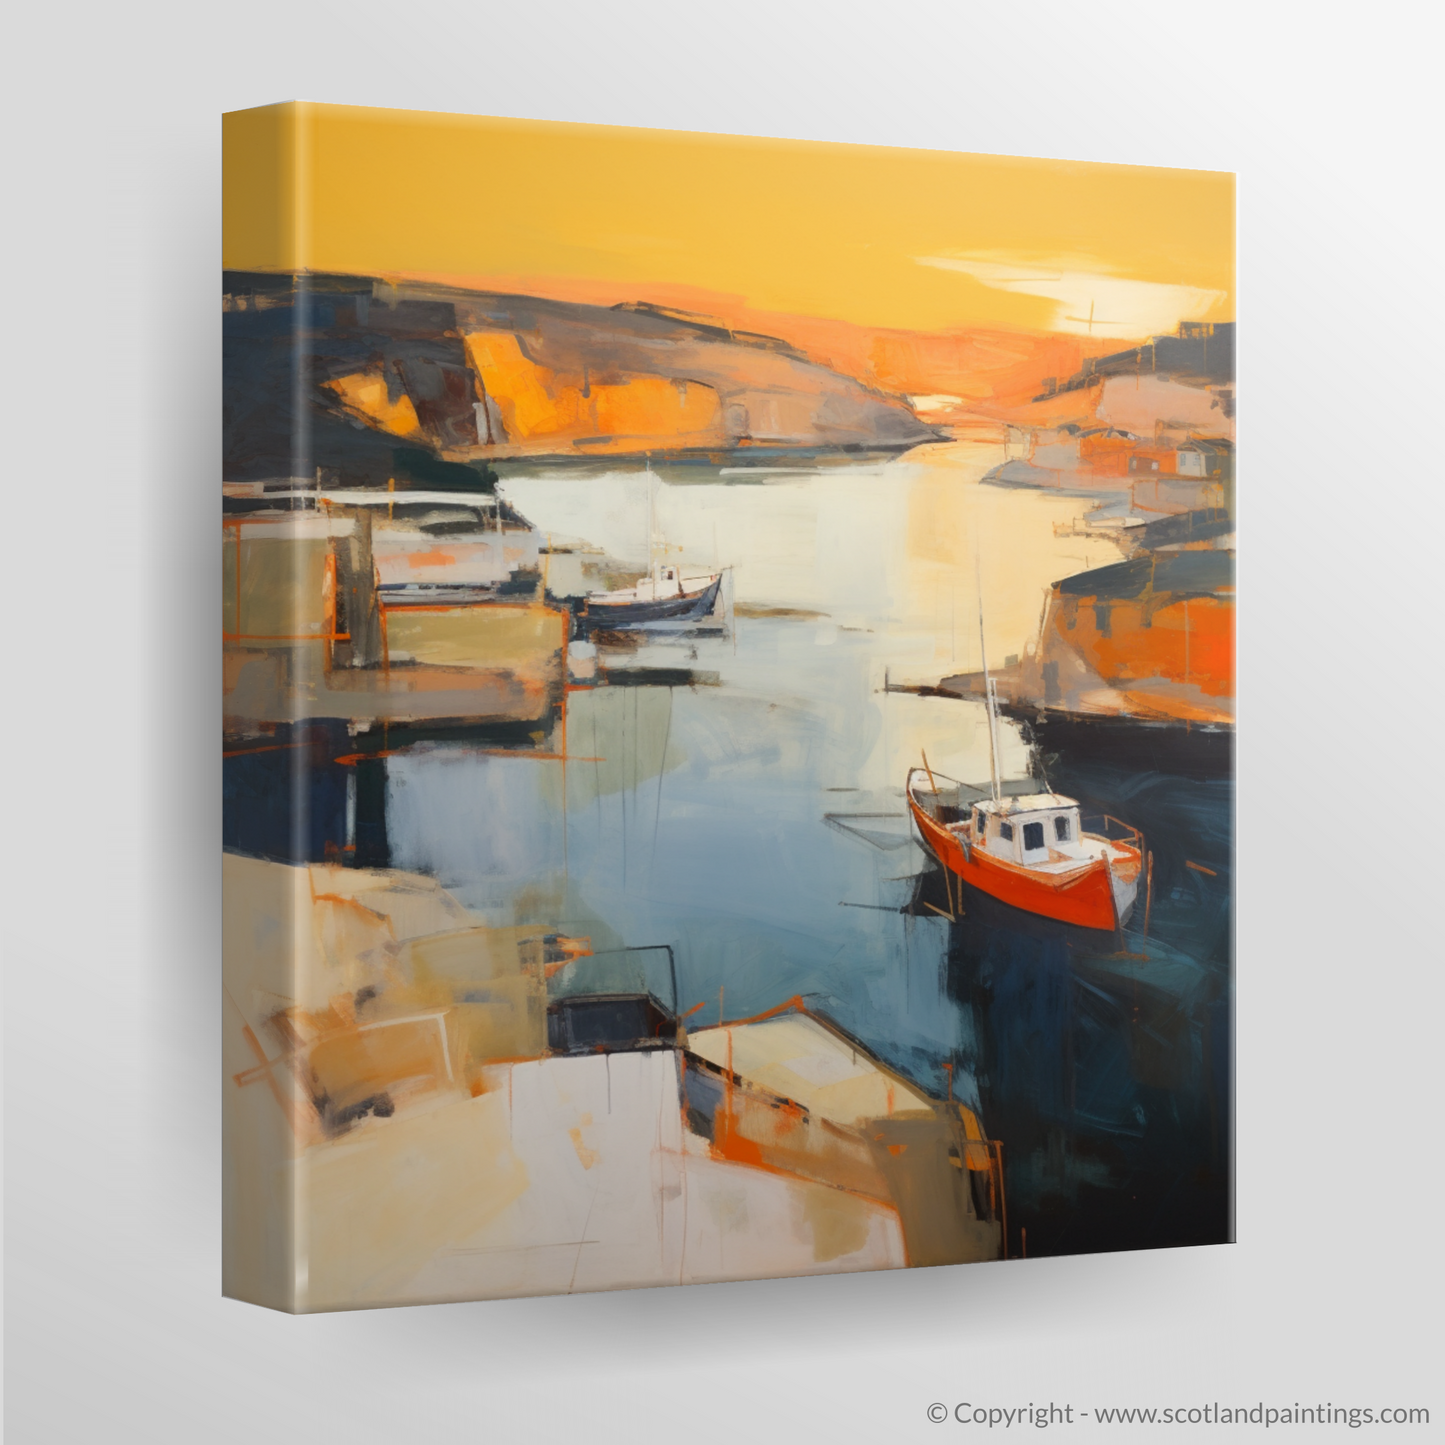 Golden Embrace at St Abba's Harbour - An Abstract Impressionist Ode to the Scottish Coast